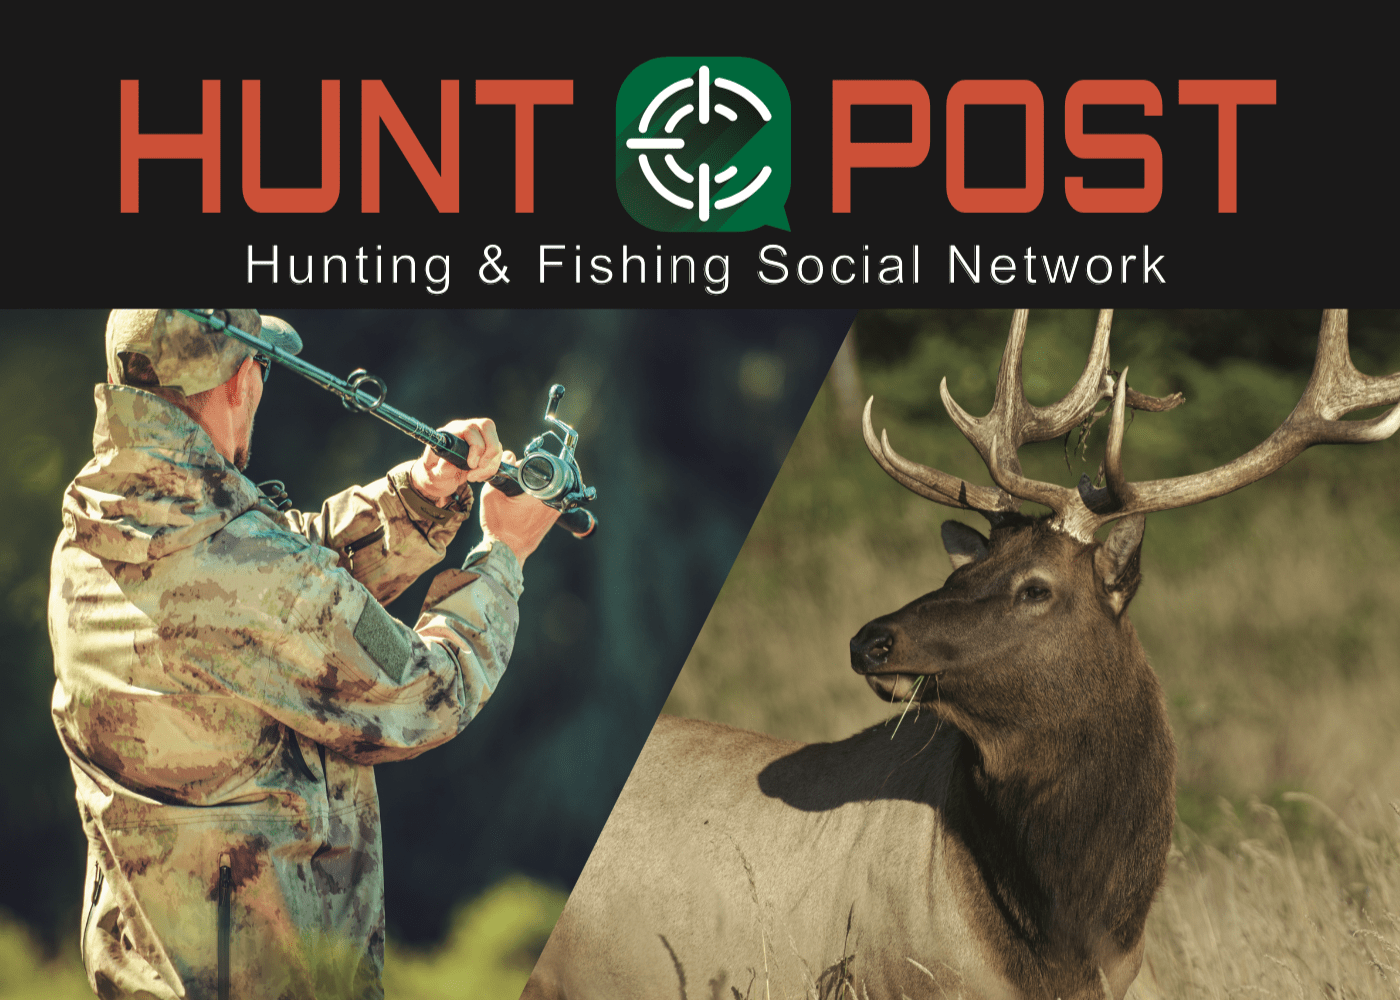 Social Life Network Plans Launch of New E-Commerce Platform for Hunting and Fishing Community